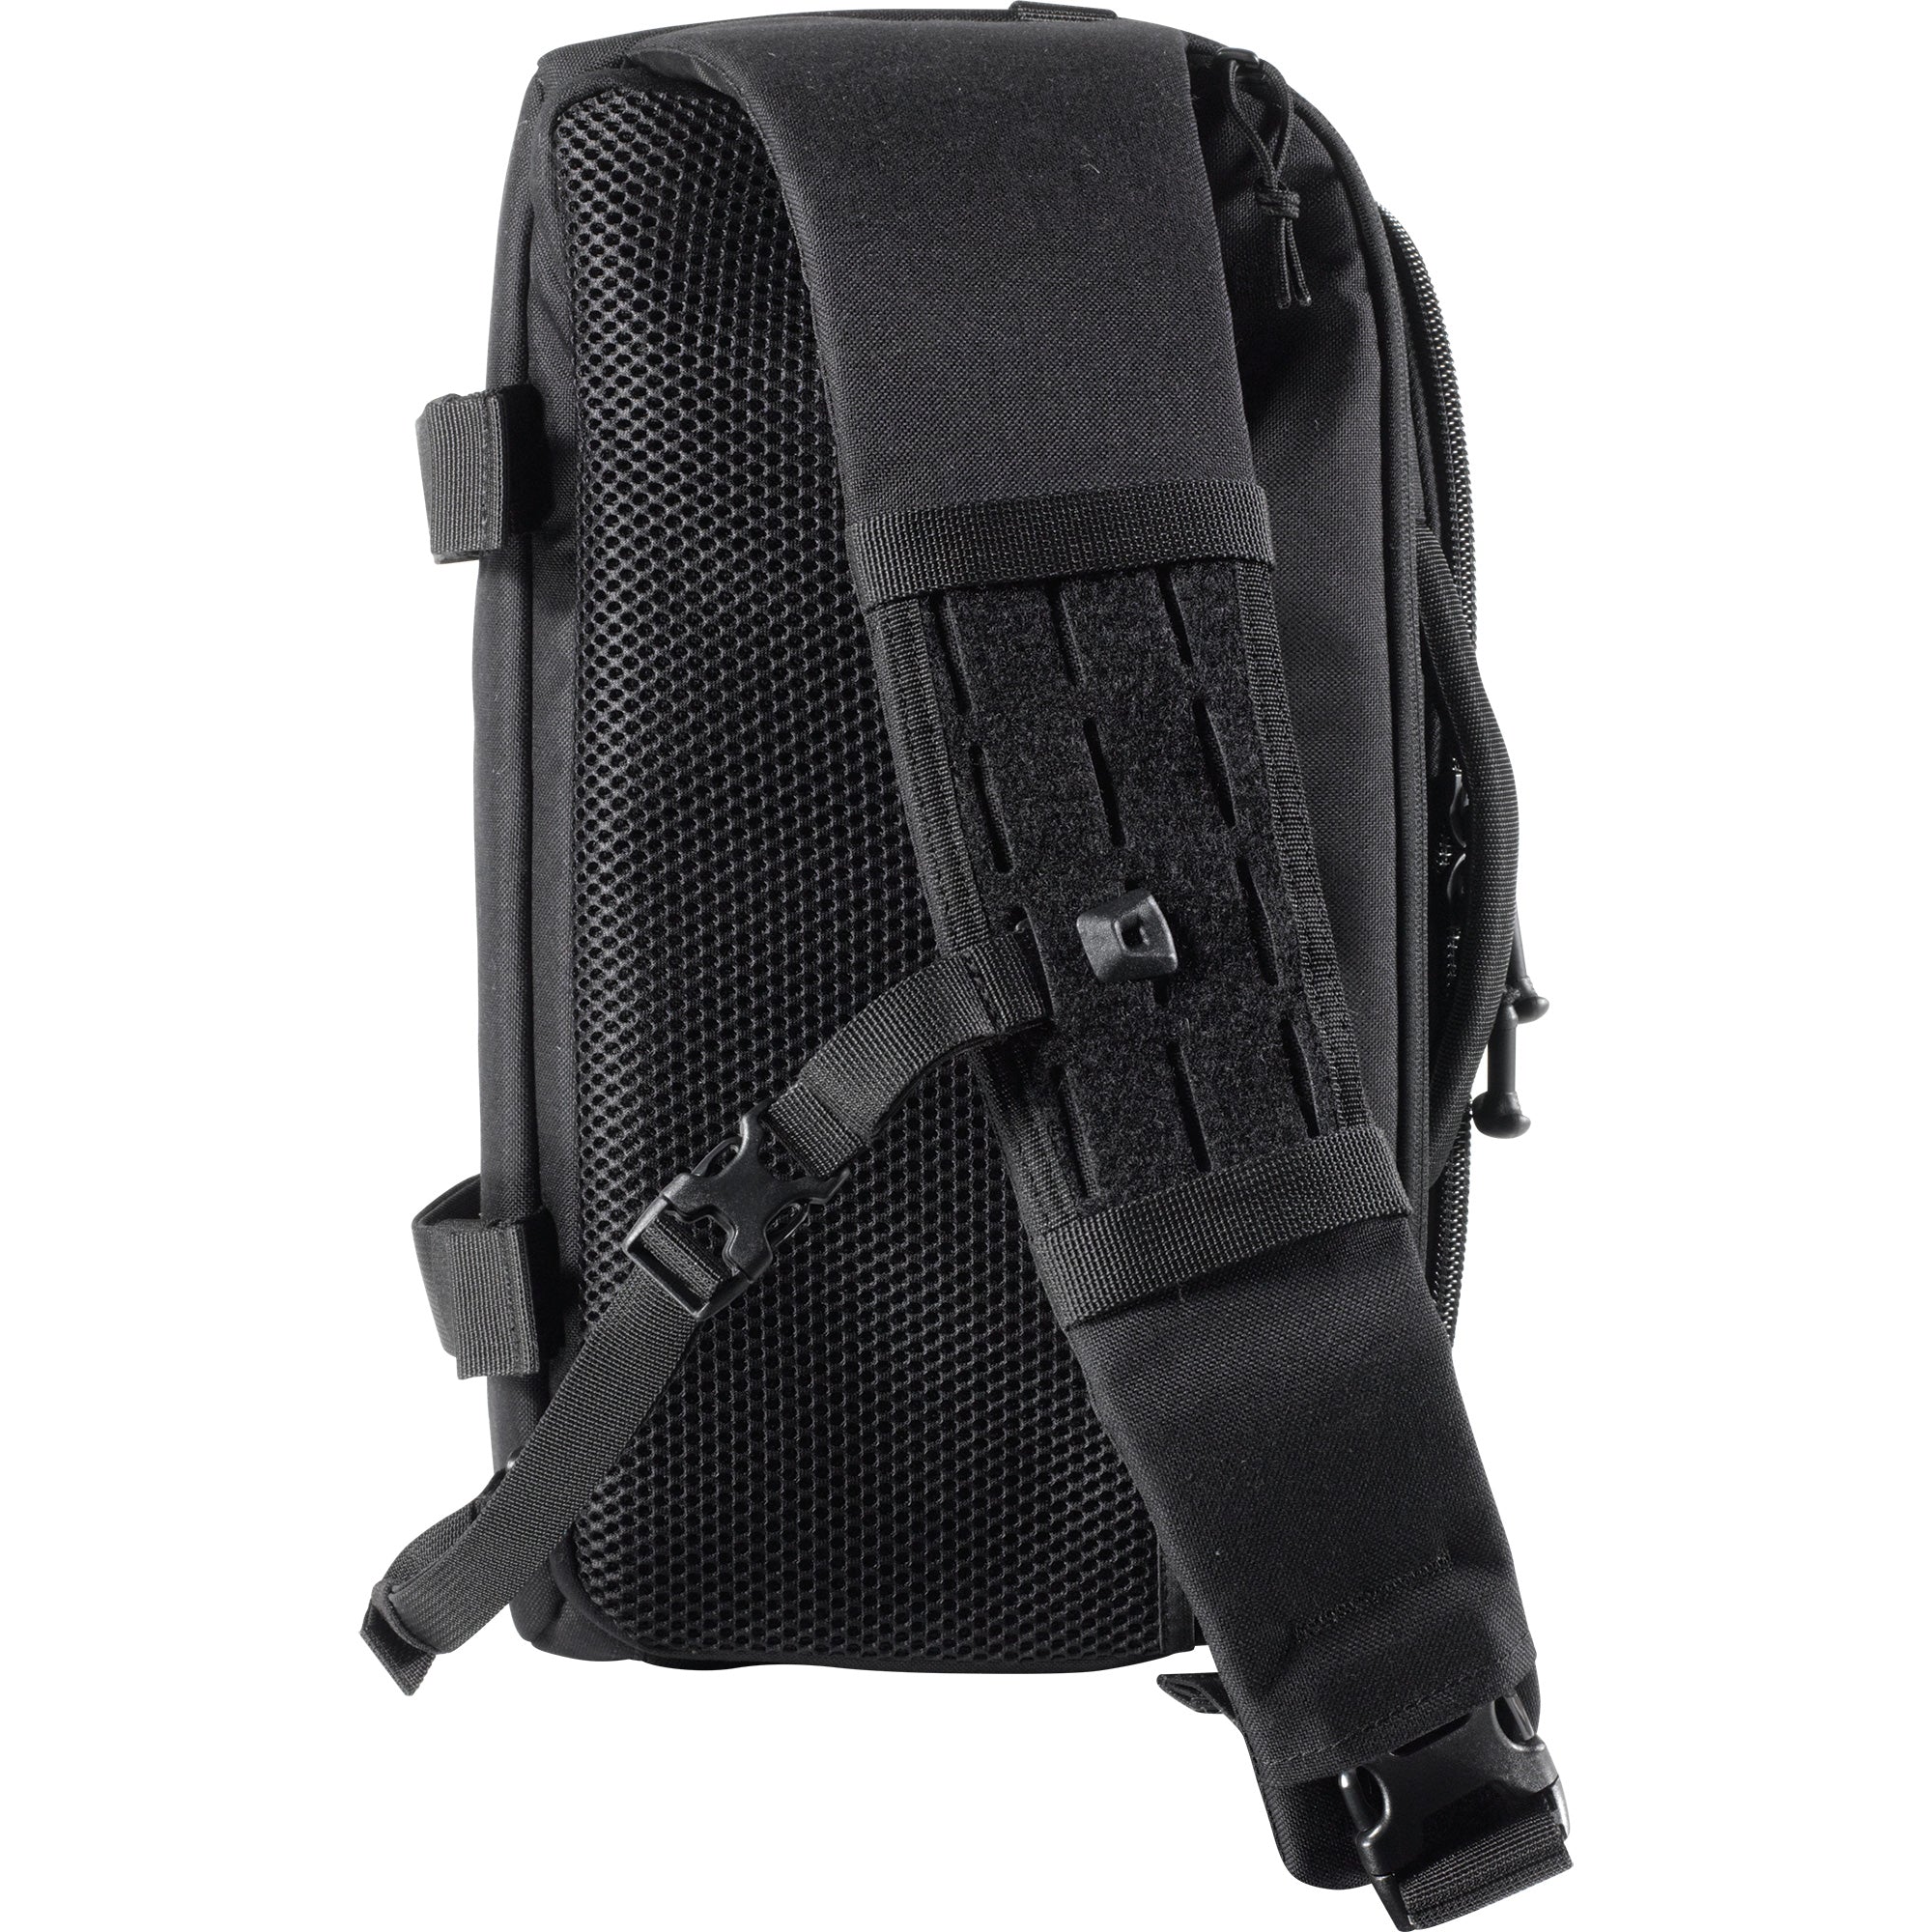 5.11 Tactical COVRT Z.A.P. Conceal Carry Sling Bag